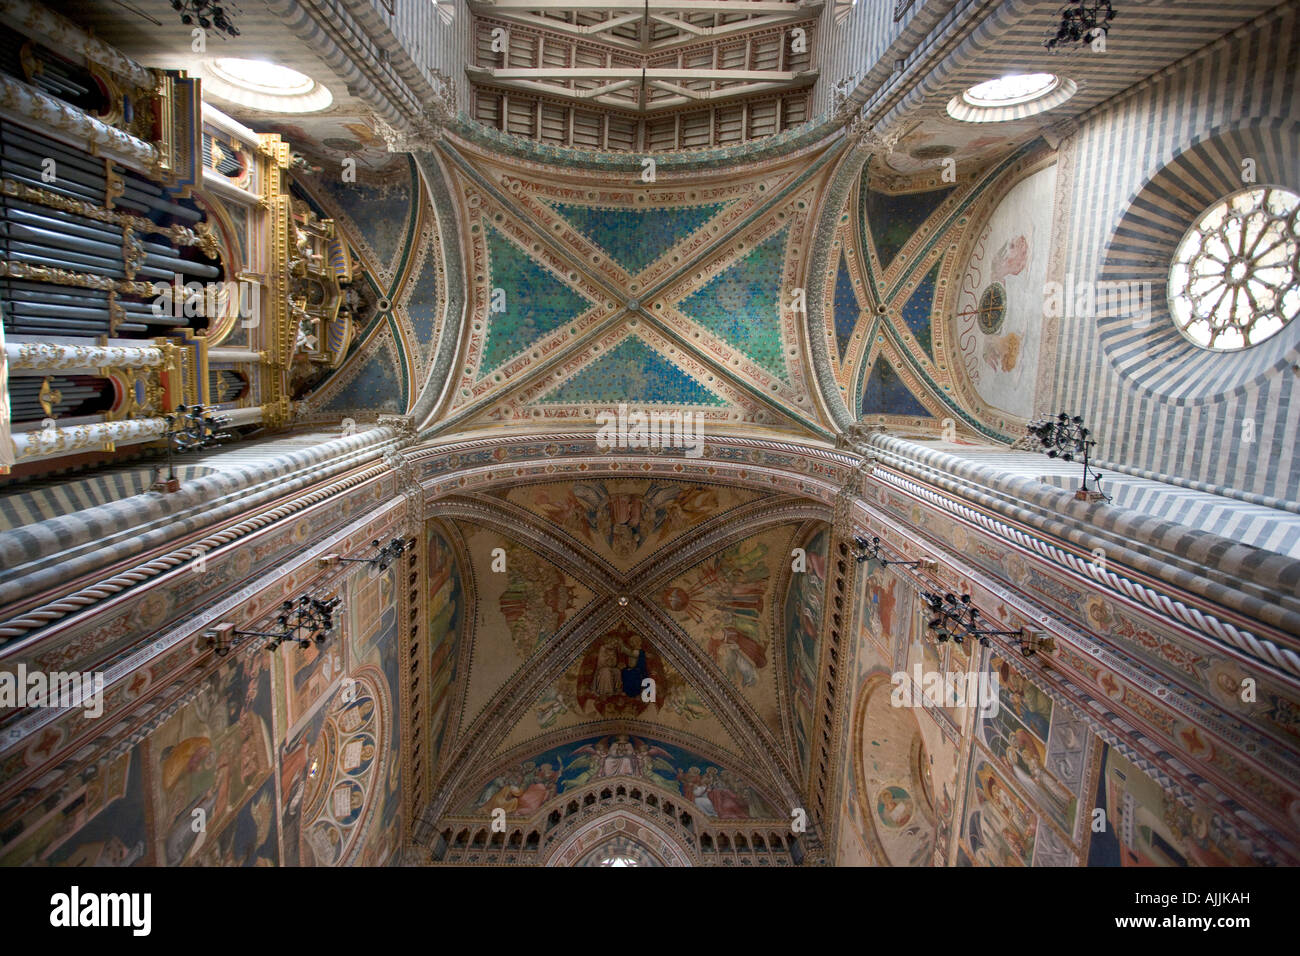 Ceiling of 12th century cathedral on Piazza del Duomo Orvieto Italy Stock Photo